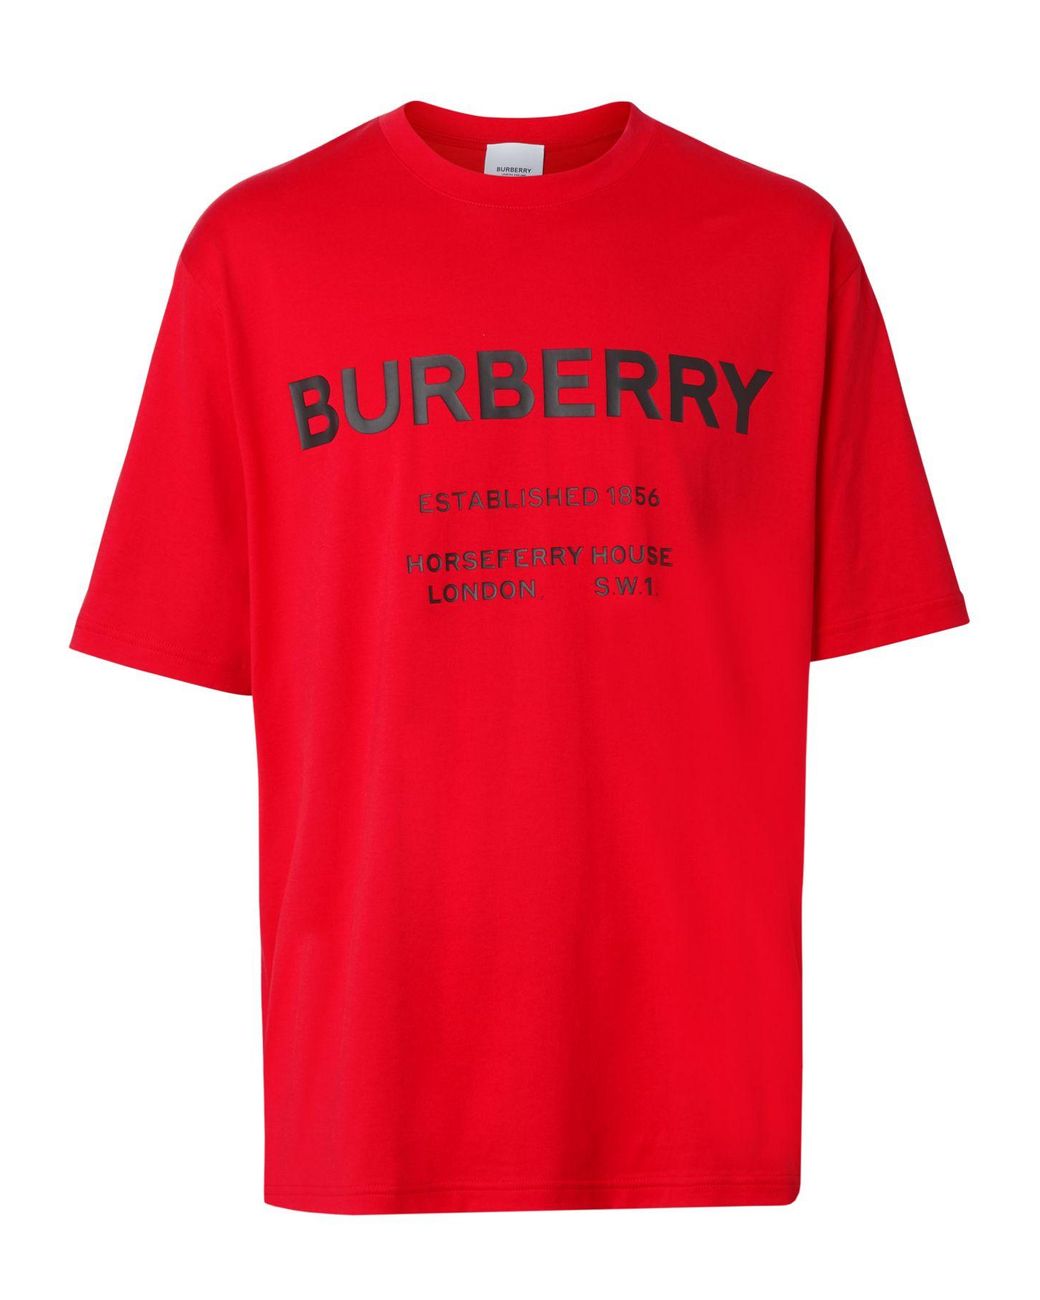 Burberry Established Addressed Logo Tee in Bright Red (Red) for 